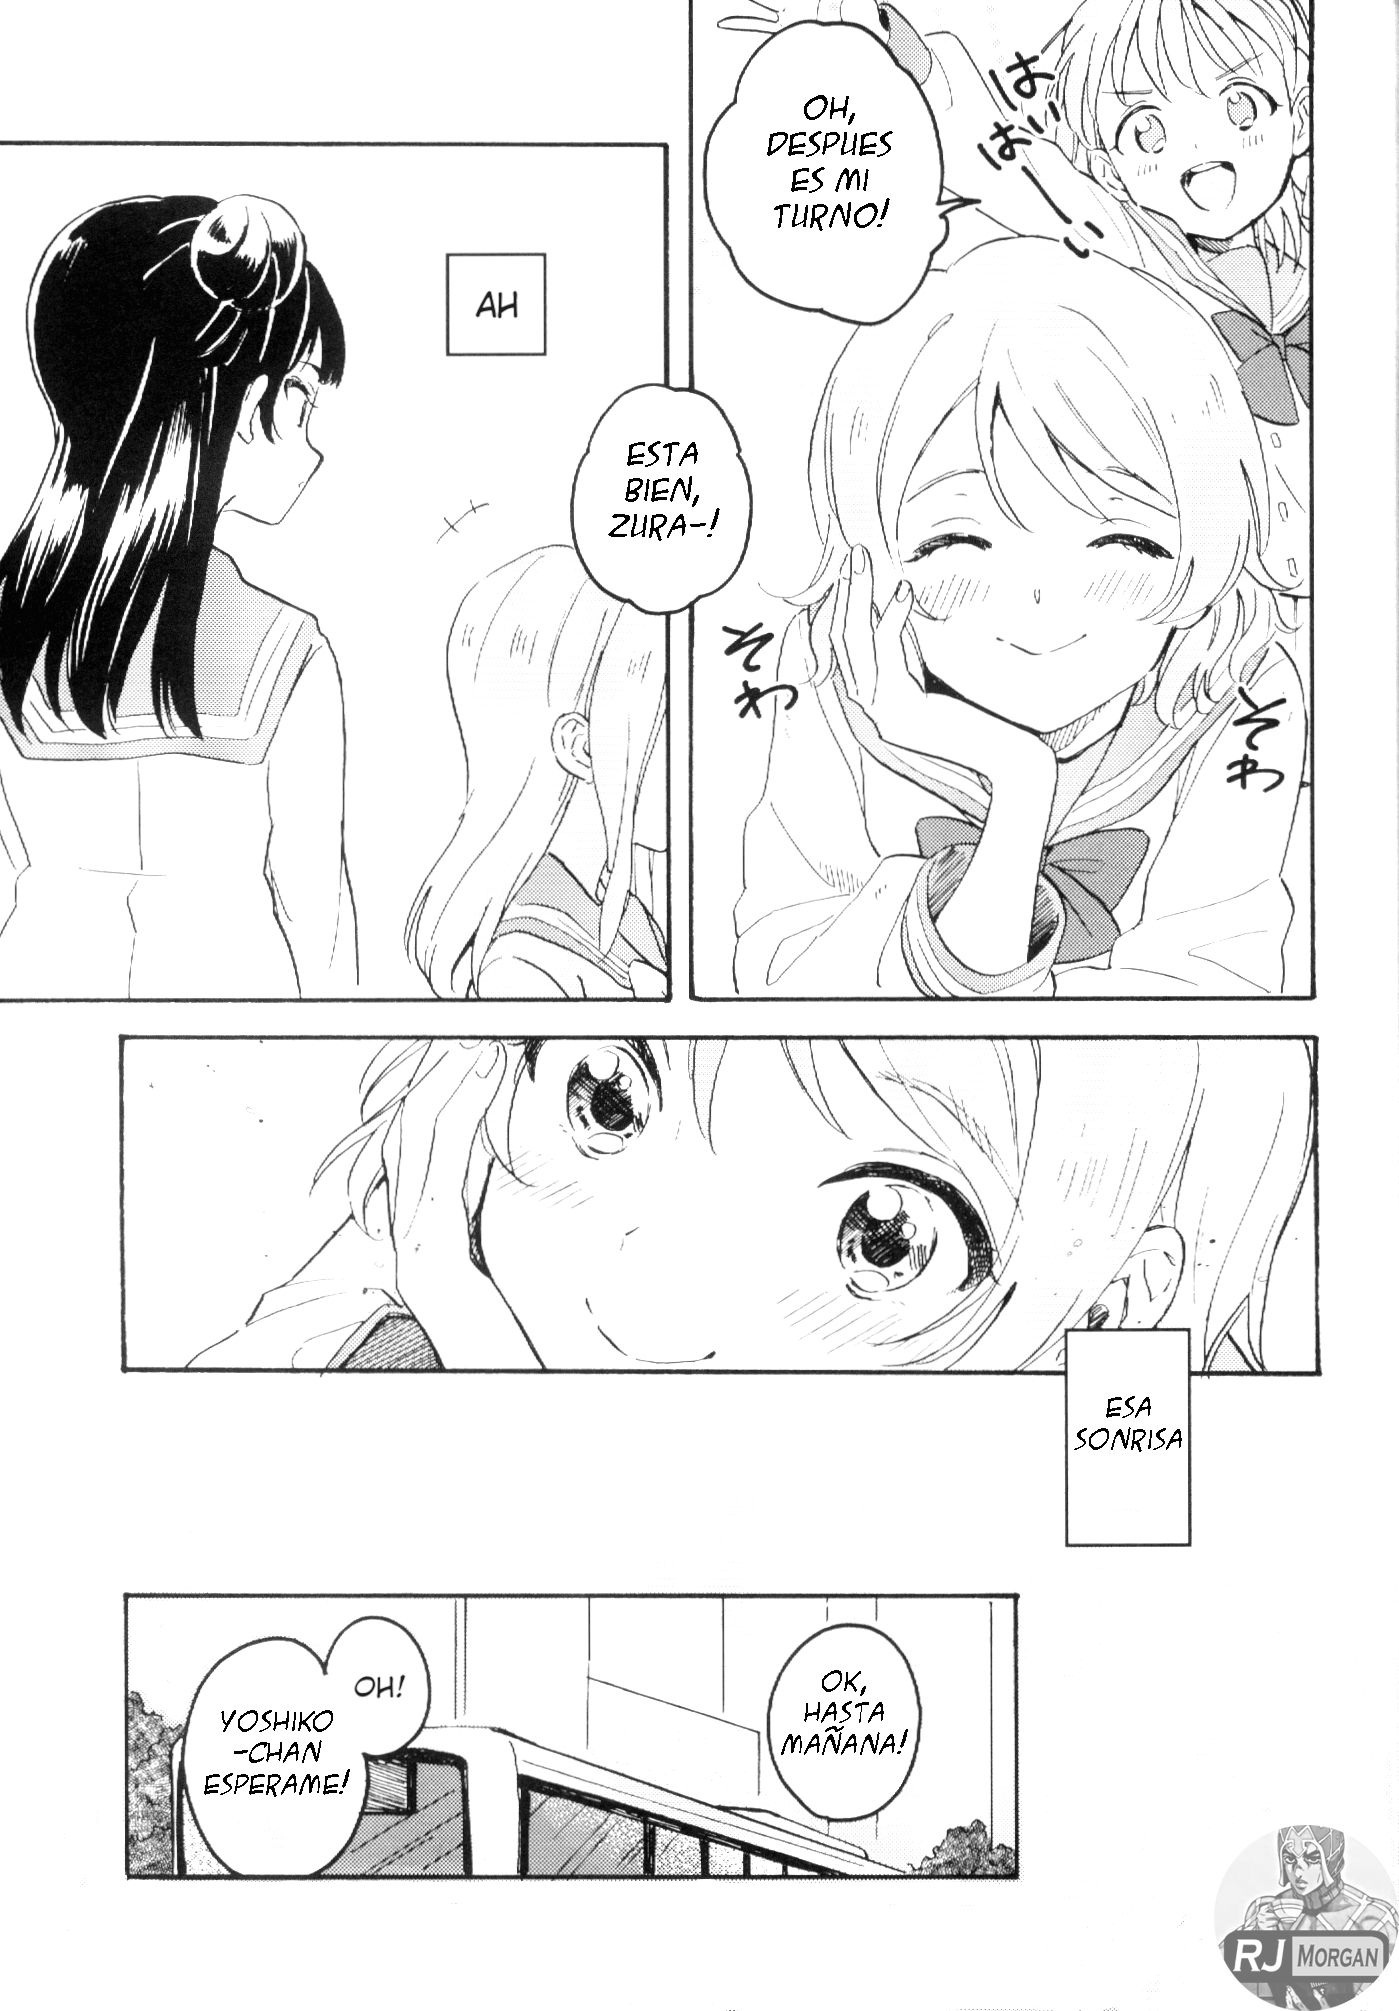 Alls Well That Ends Well (Love Live Sunshine) - 3